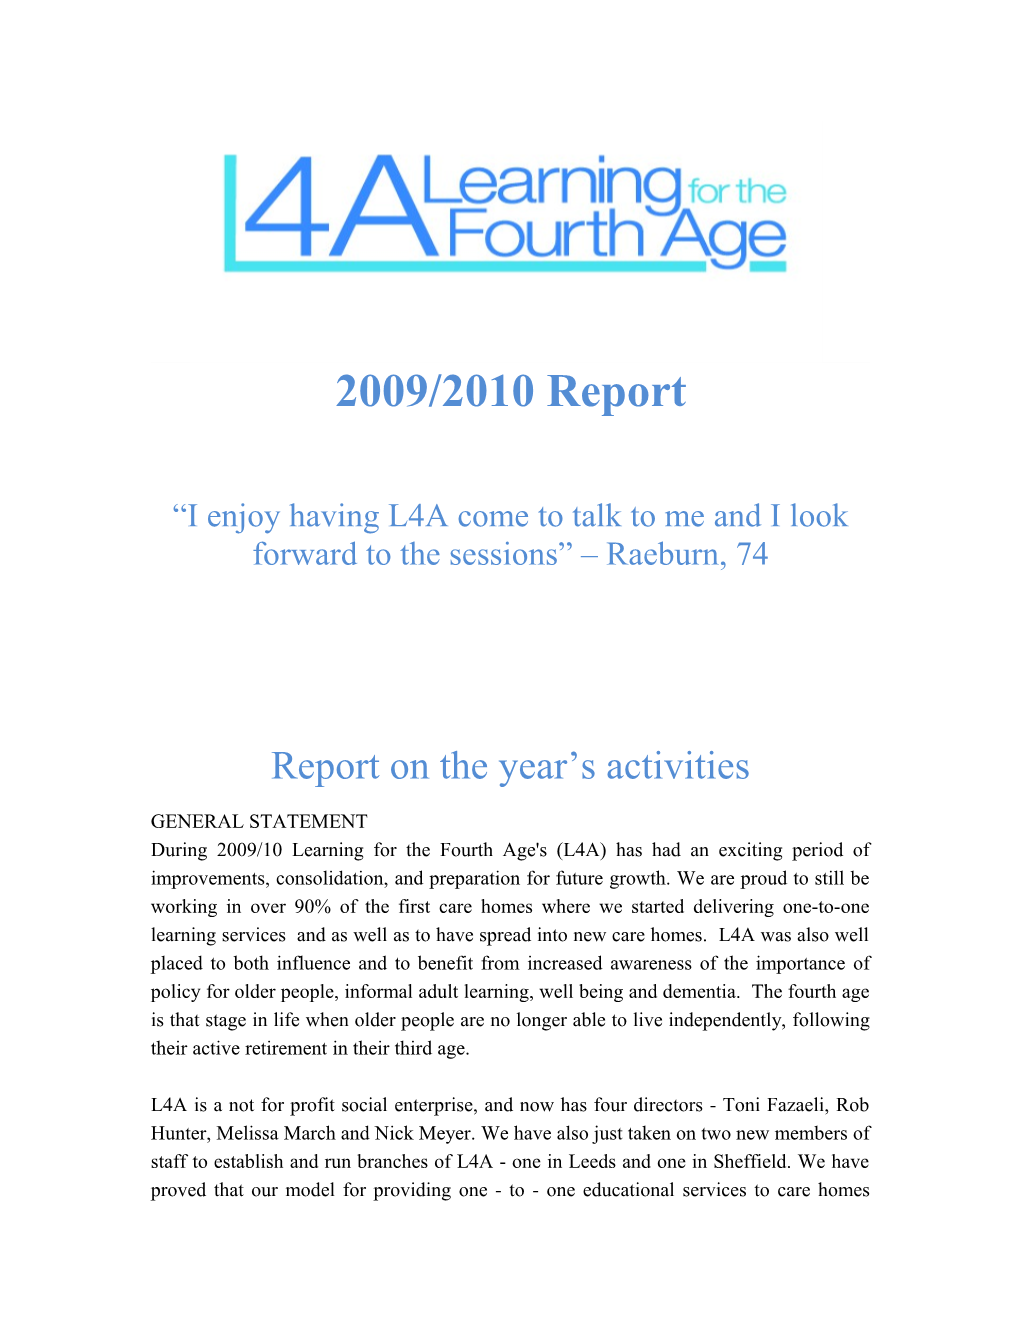 I Enjoy Having L4A Come to Talk to Me and I Look Forward to the Sessions Raeburn, 74